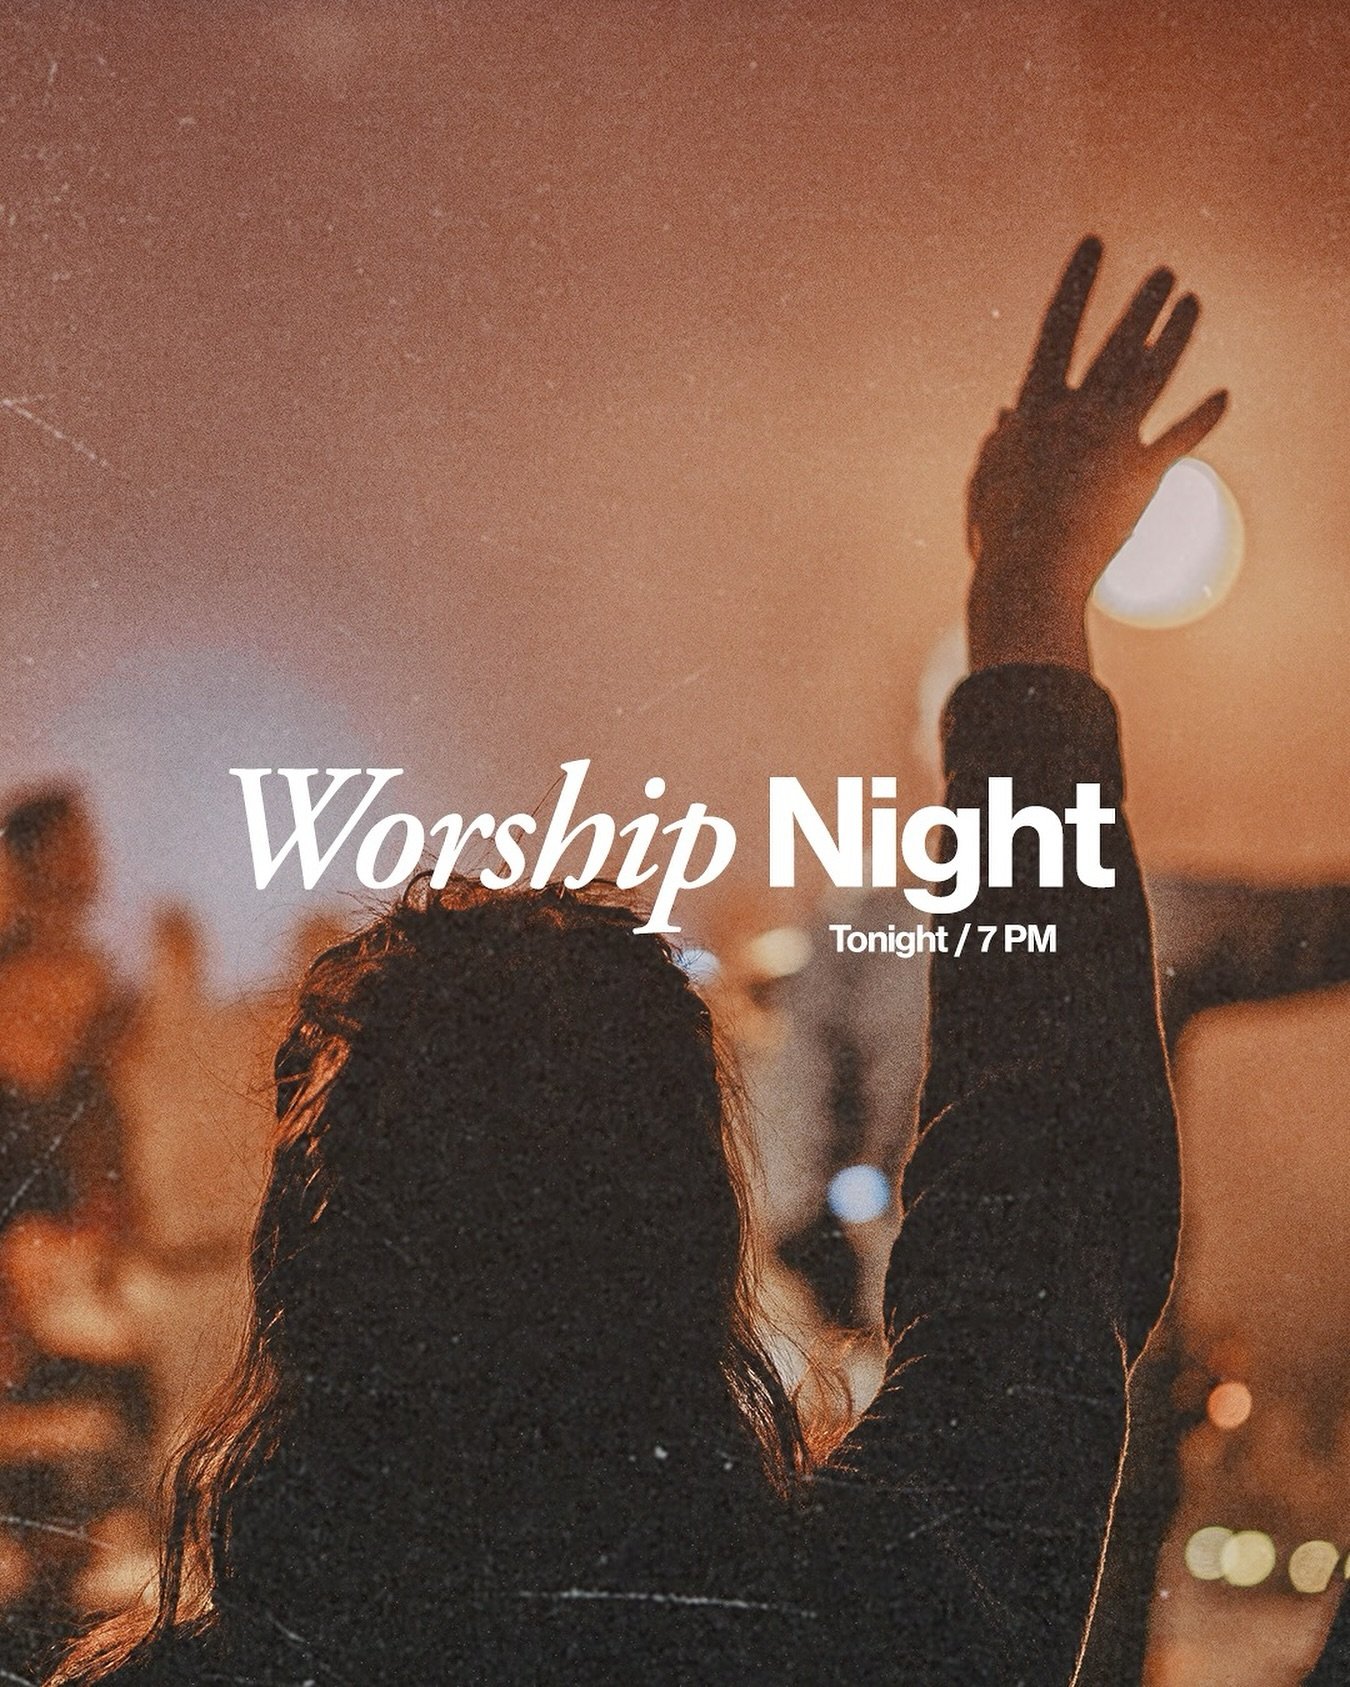 WORSHIP NIGHT TONIGHT! 🙌🏽

We can't wait to see you at 7 pm in the Costick Center Chapel!